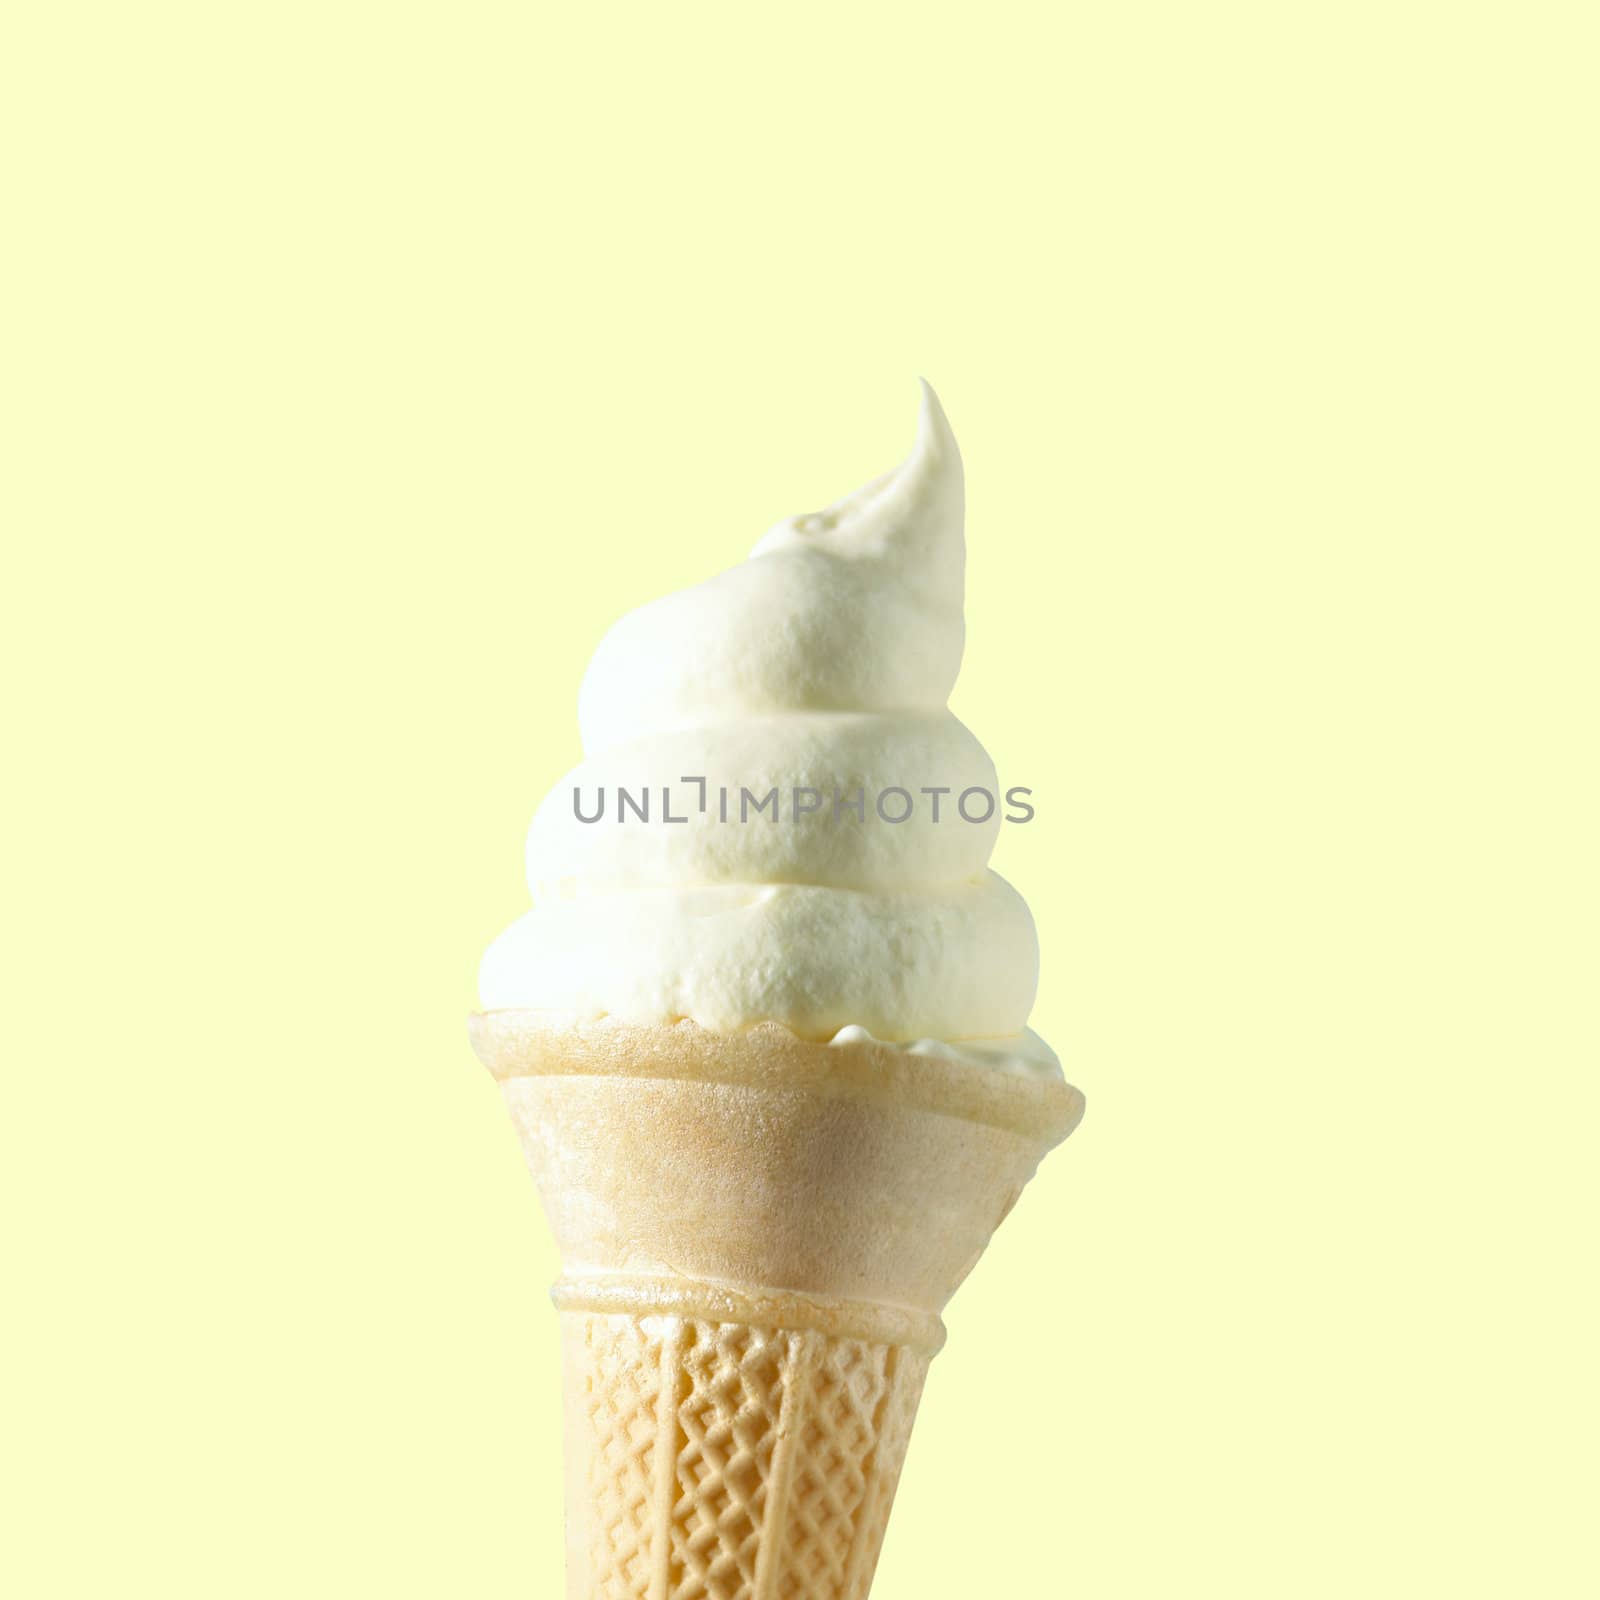 Soft Whipped Ice Cream In A Wafer Cone